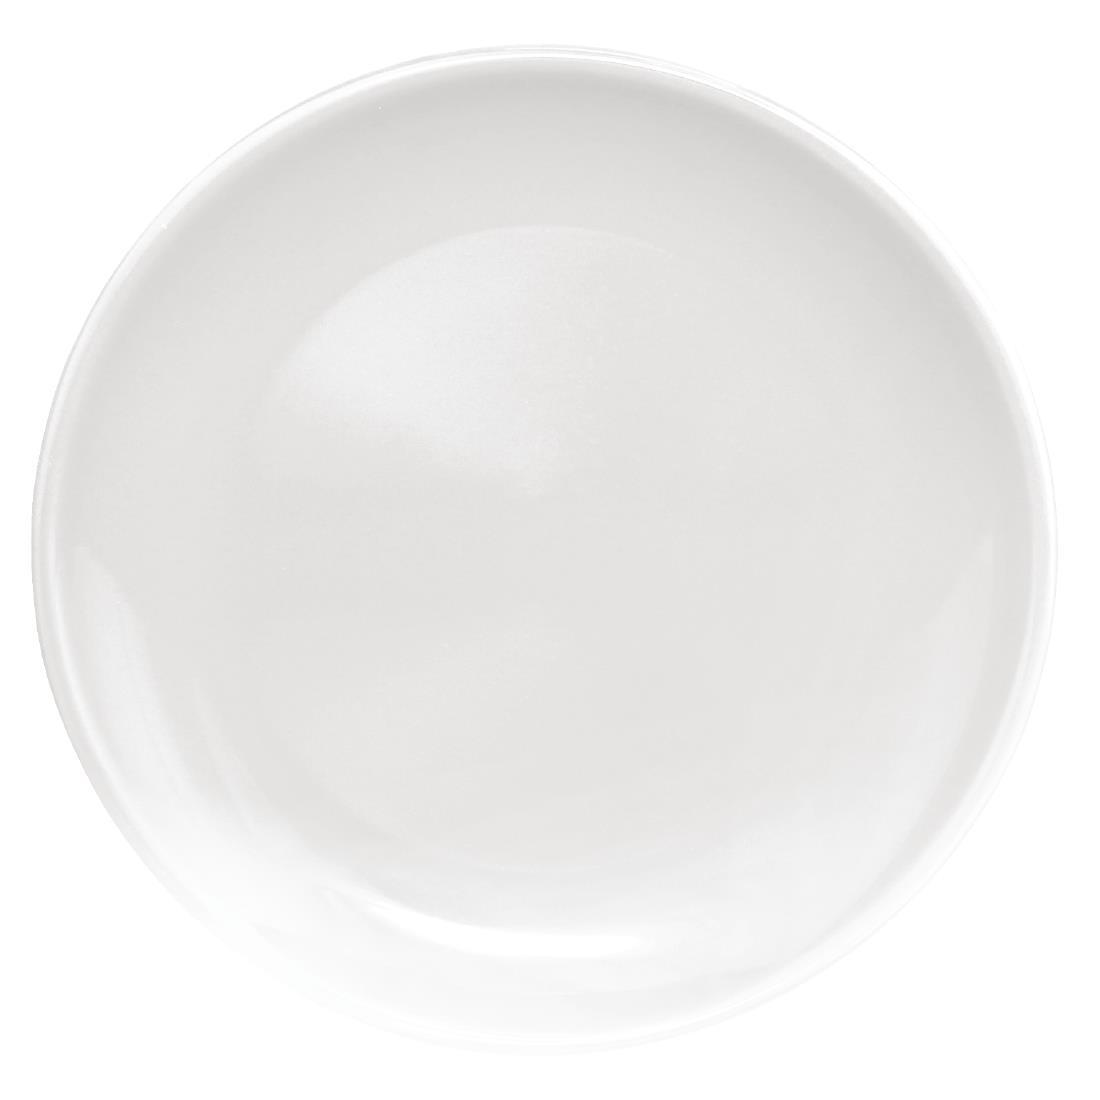 Olympia Cafe Coupe Plate White 205mm (Pack of 12) - CG353  - 3